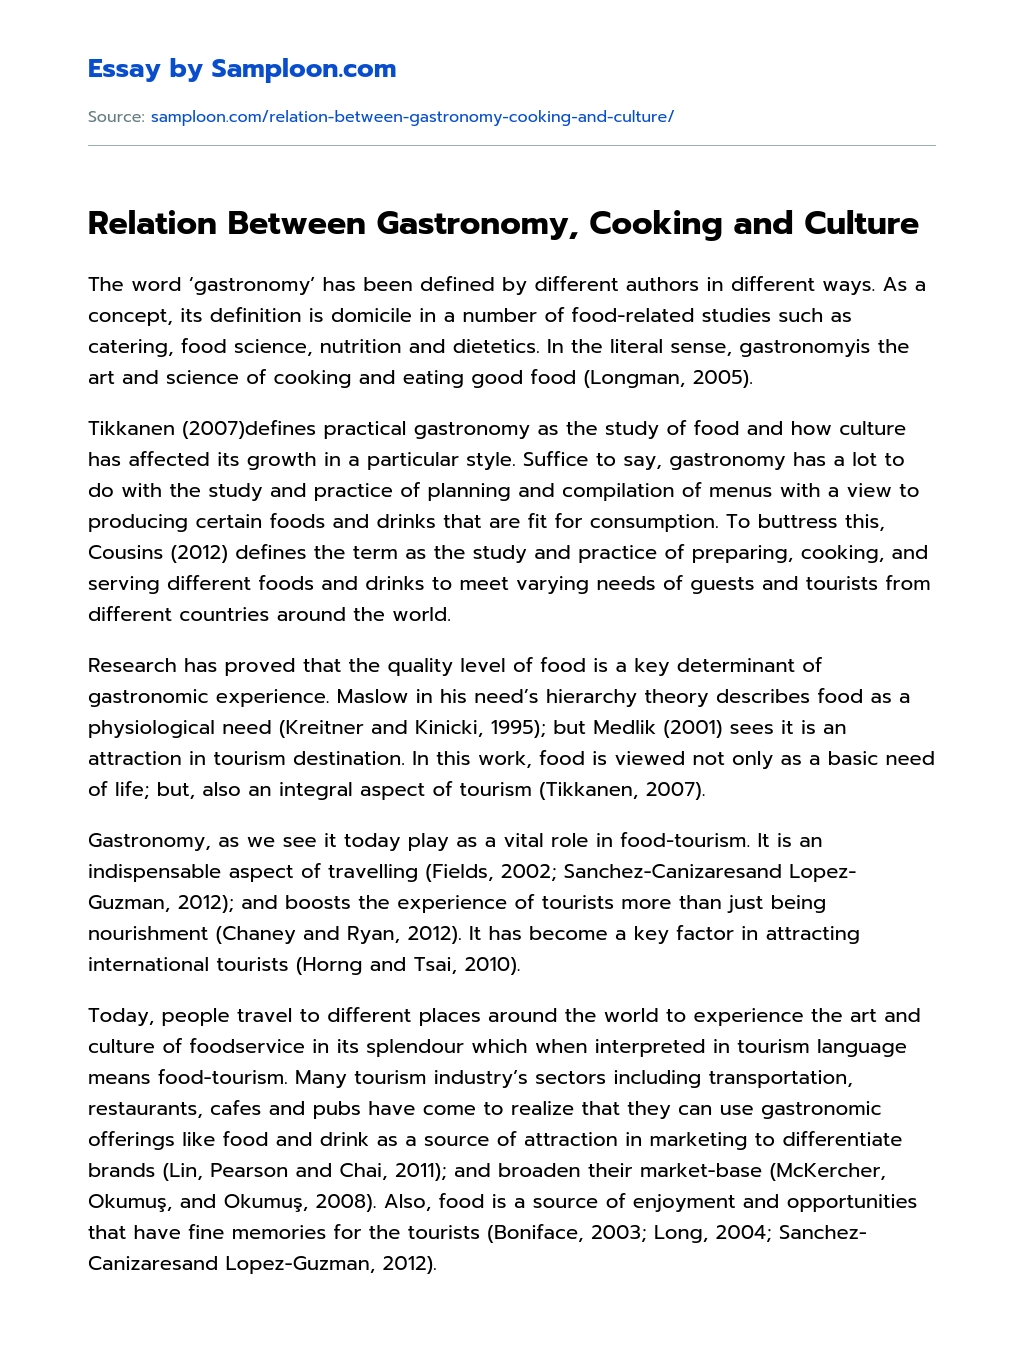 Relation Between Gastronomy, Cooking and Culture Argumentative Essay essay